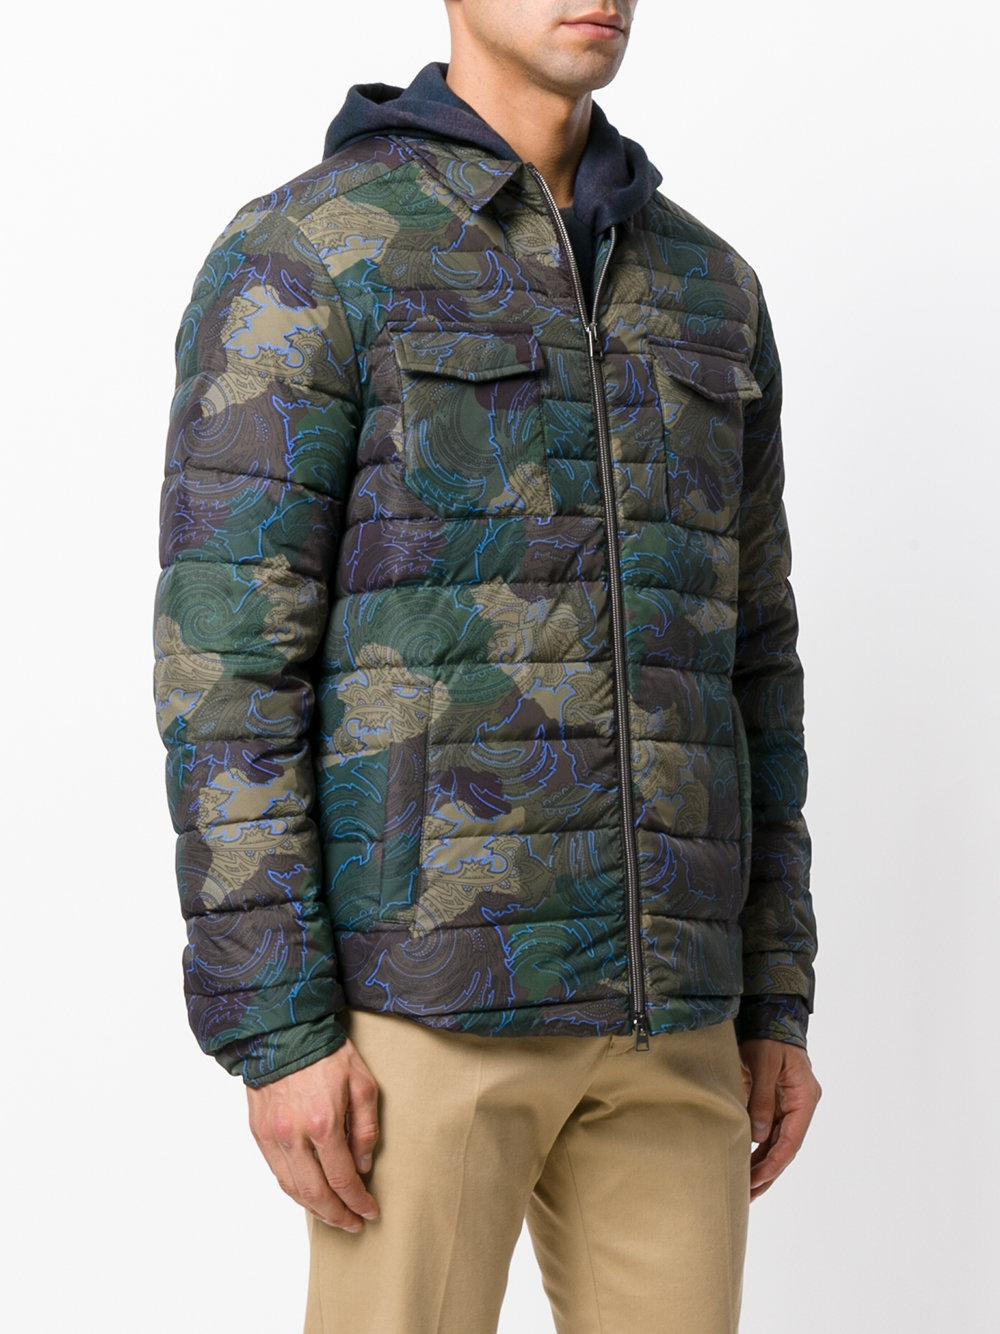 Lyst - Etro Camouflage Puffer Jacket in Green for Men